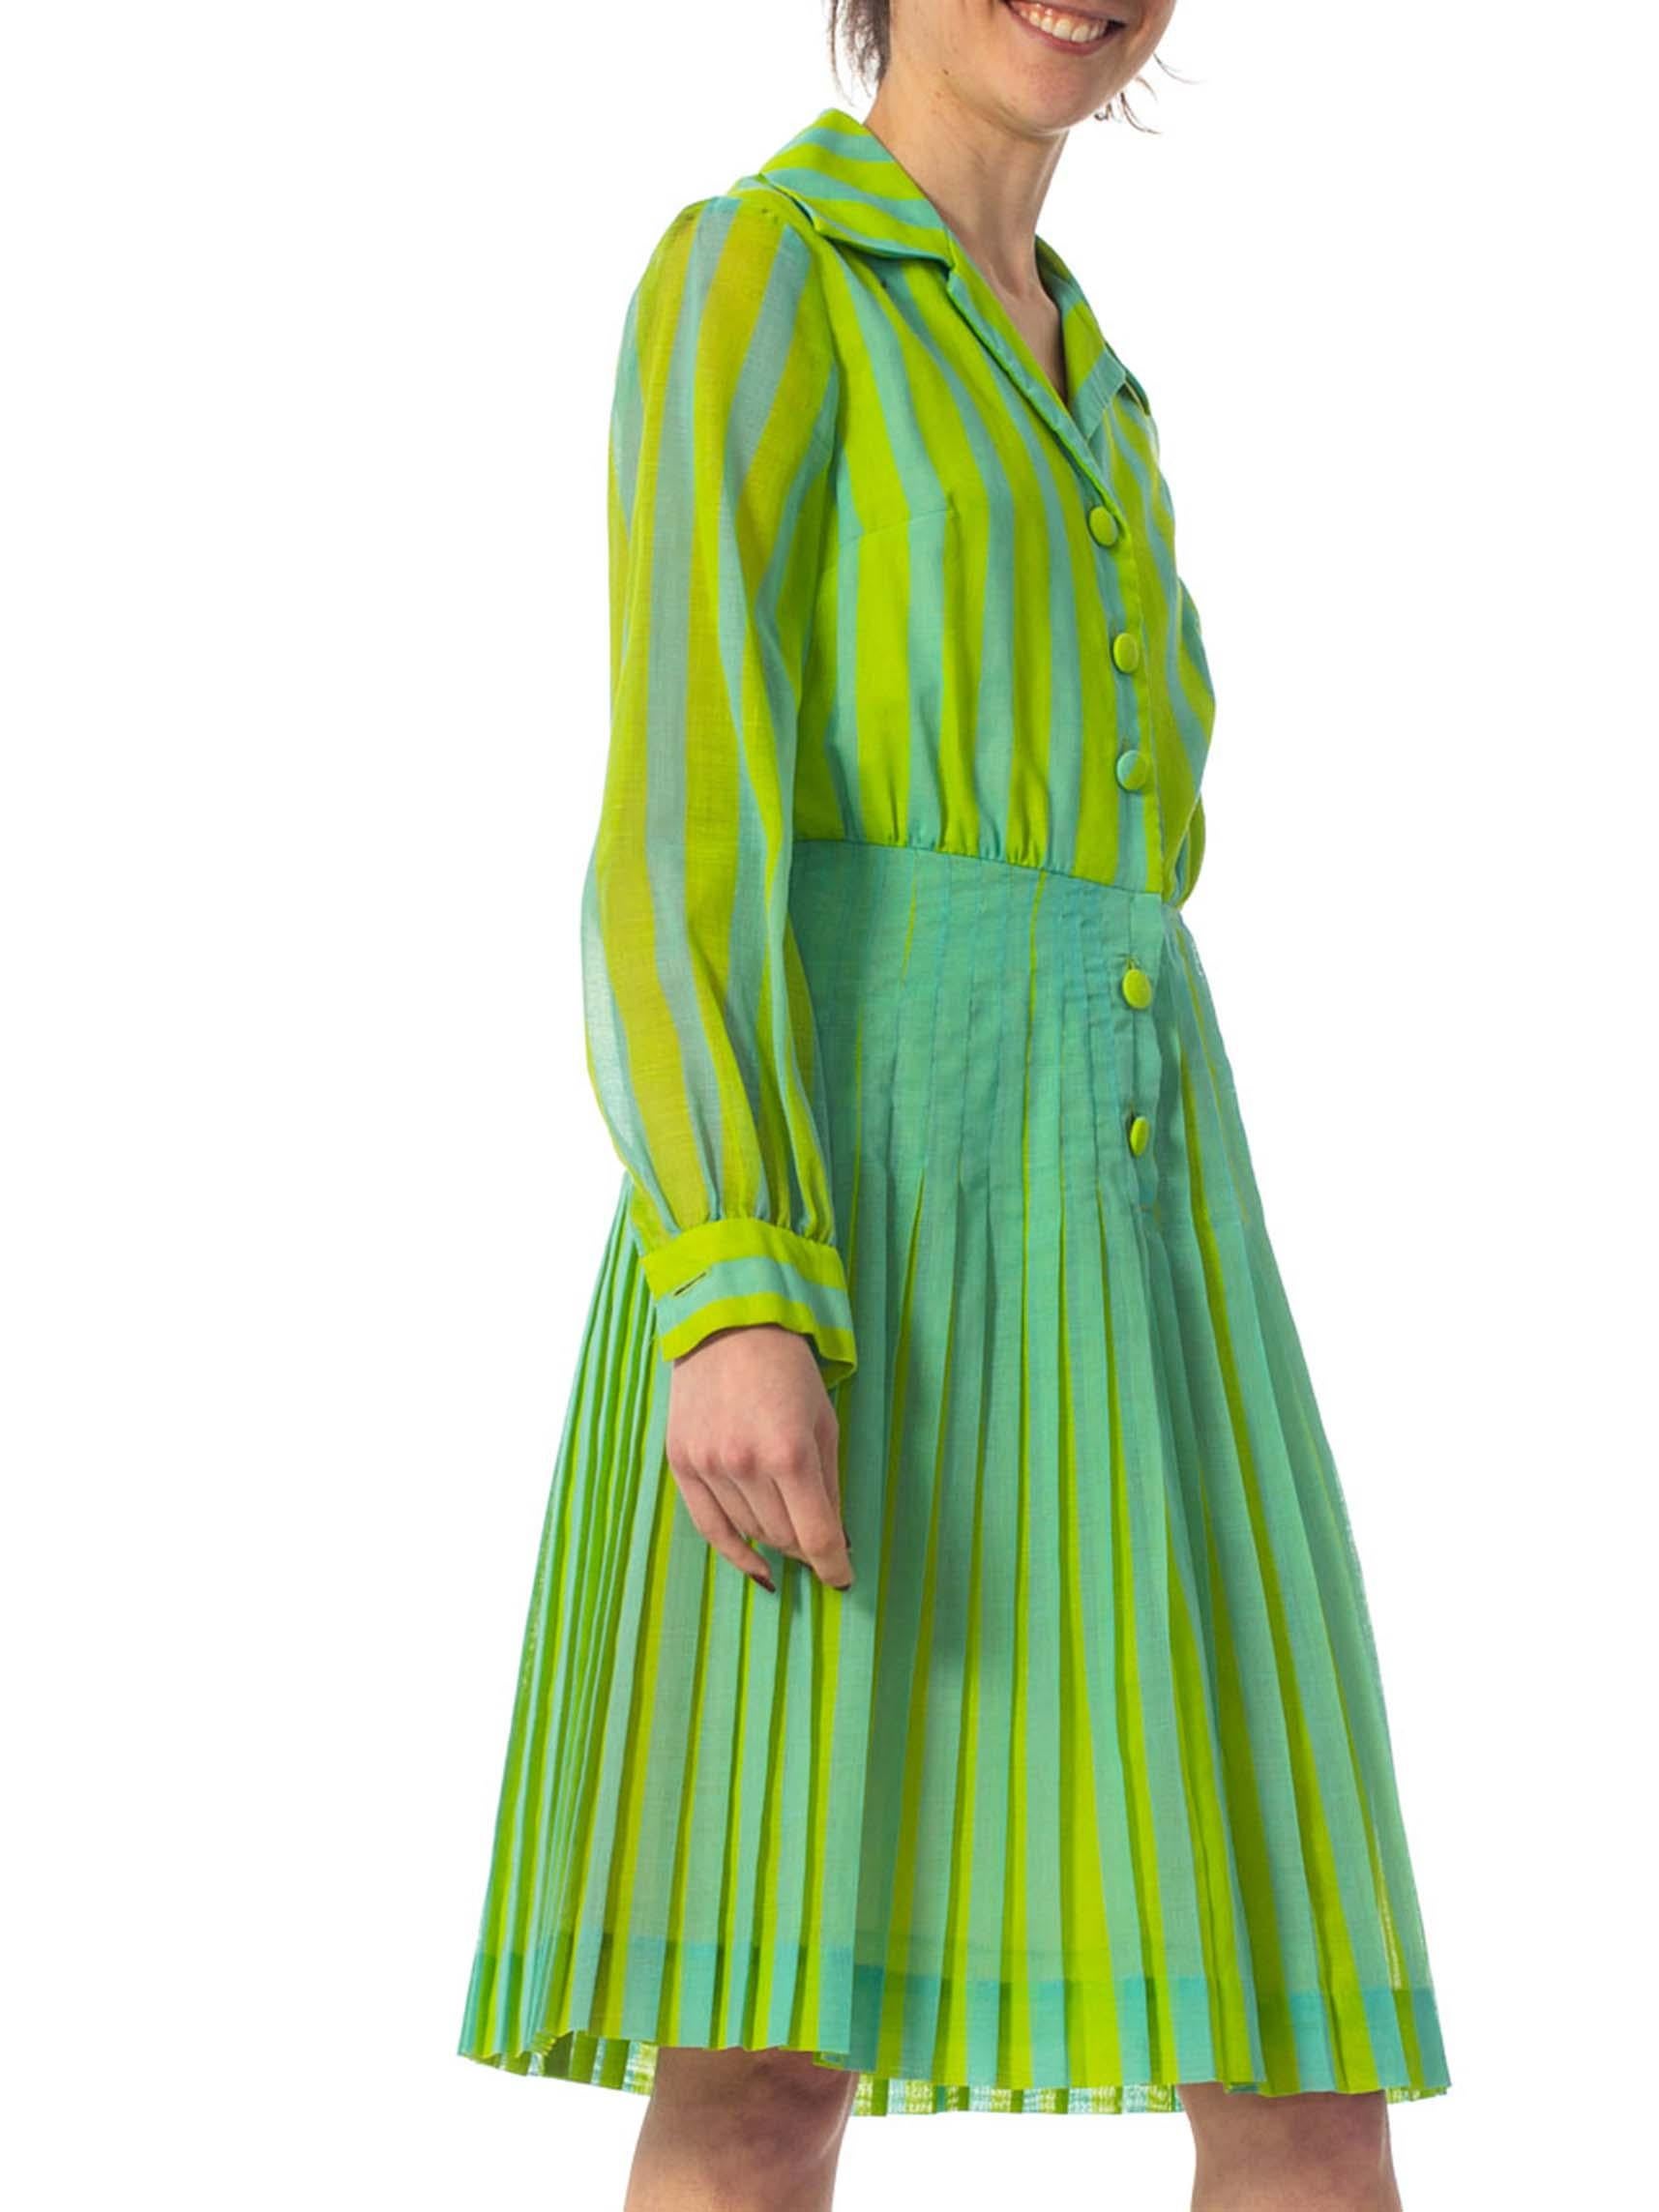 1970S DADDY DRADDY's Lime Green & Blue Cotton Striped Pleated Mod Dress In Excellent Condition For Sale In New York, NY